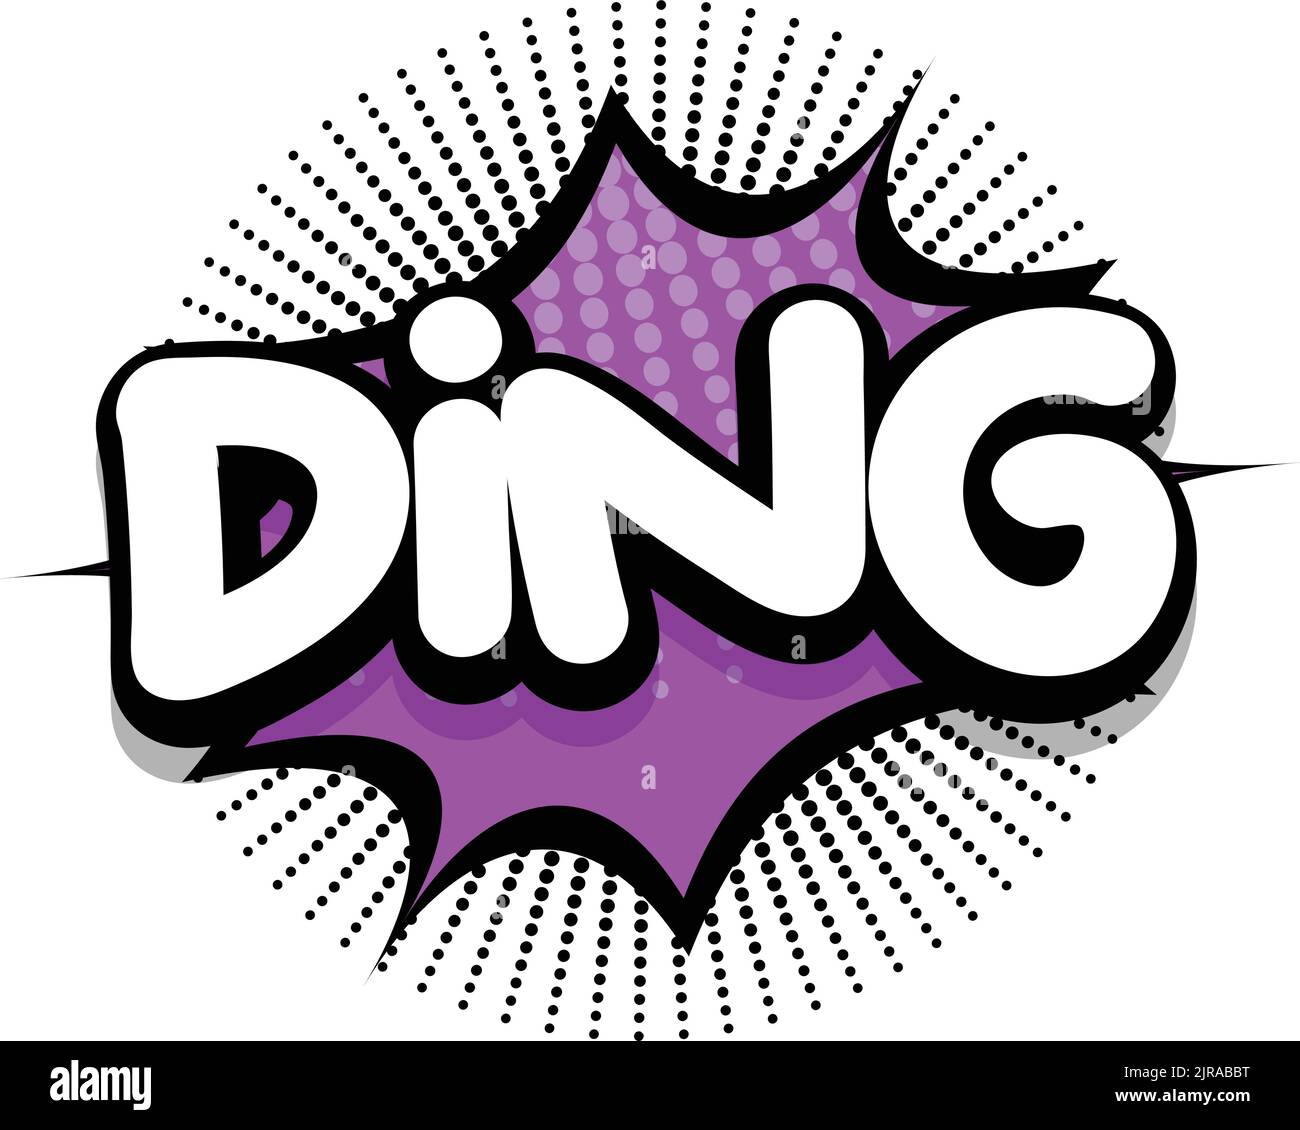 Free Vector  Ding comic book explosion bubble vector illustration